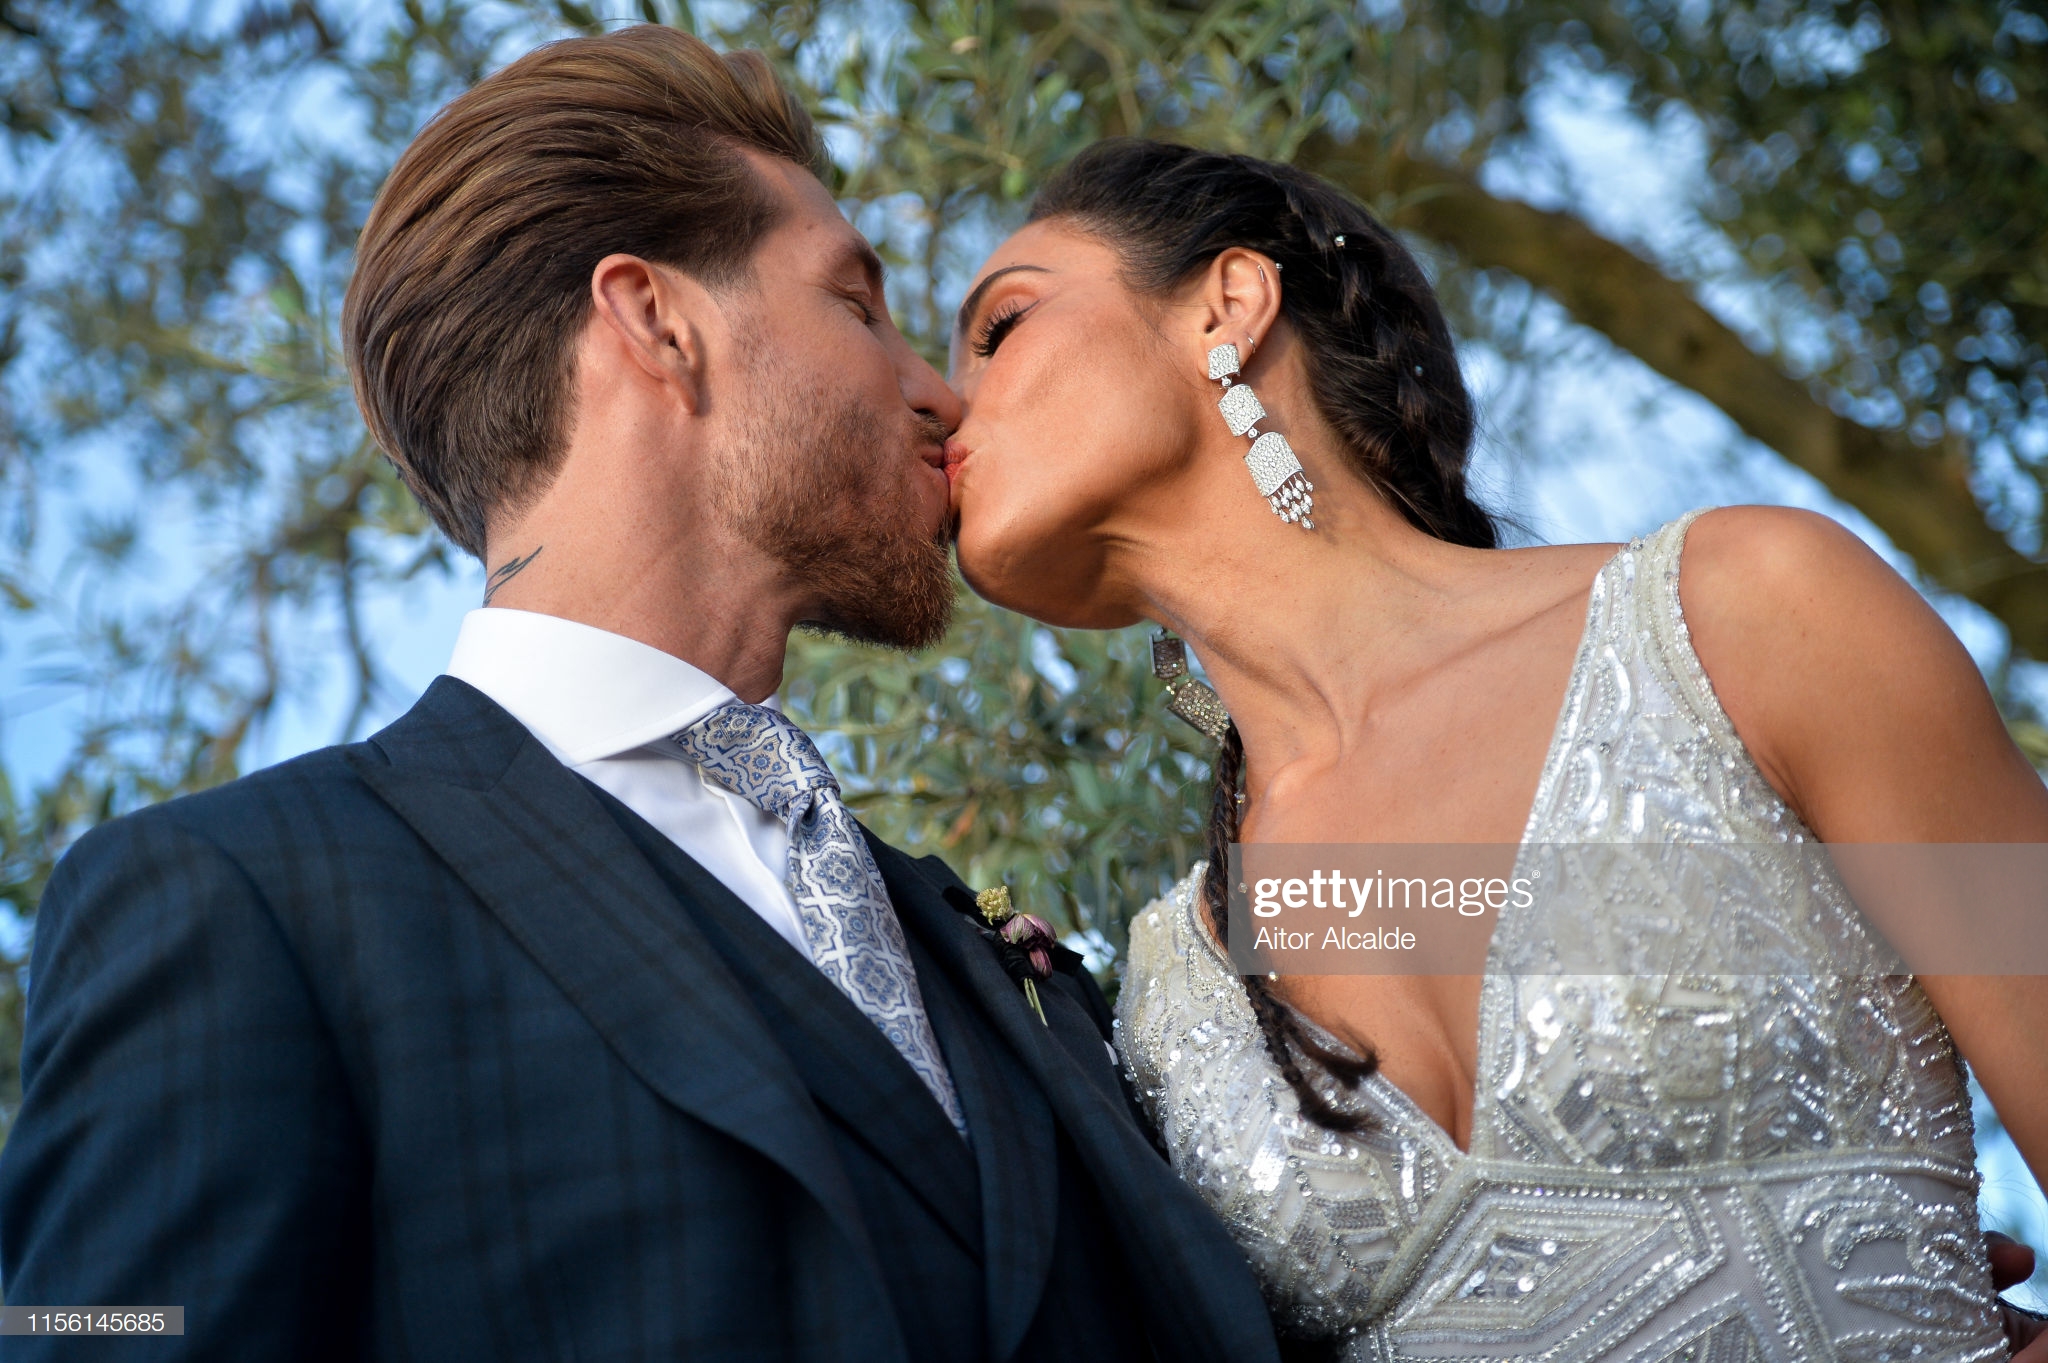 gettyimages-1156145685-2048x2048.jpg